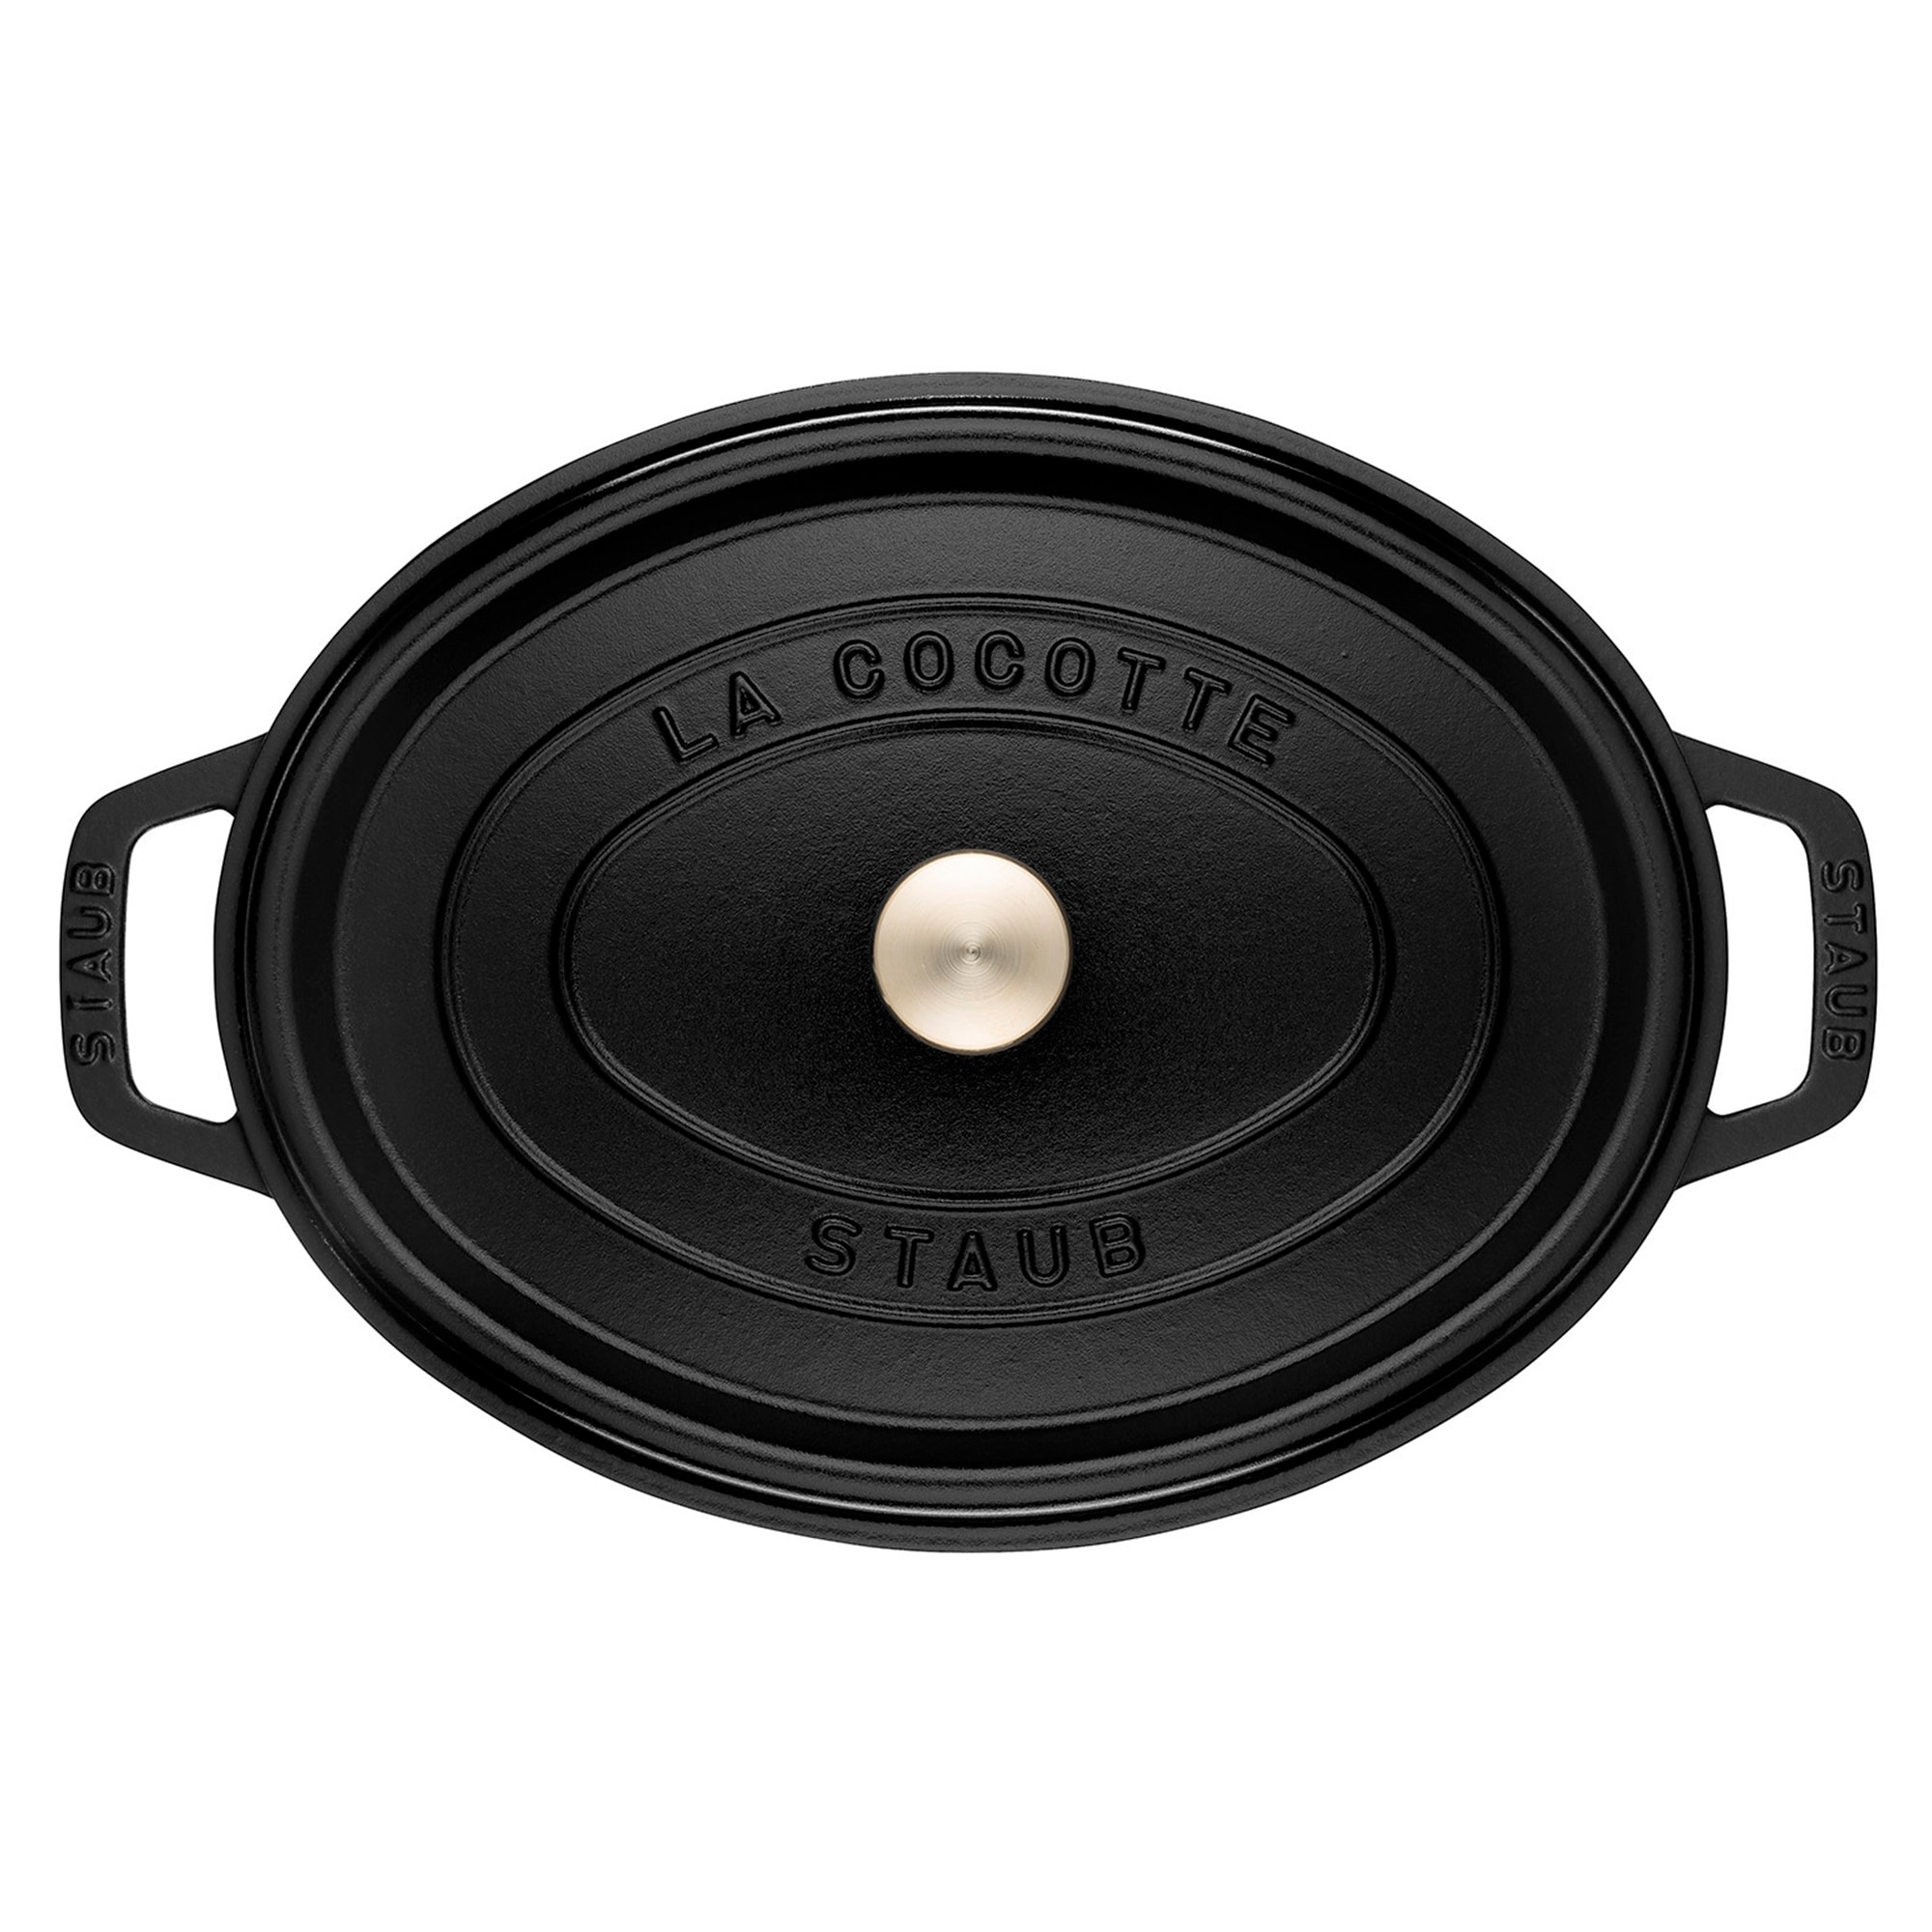 https://ak1.ostkcdn.com/images/products/is/images/direct/d456895f8b56474838e8e7df815bb1bc7feb176e/STAUB-Cast-Iron-Oval-Cocotte%2C-Dutch-Oven%2C-5.75-quart%2C-serves-5-6%2C-Made-in-France.jpg